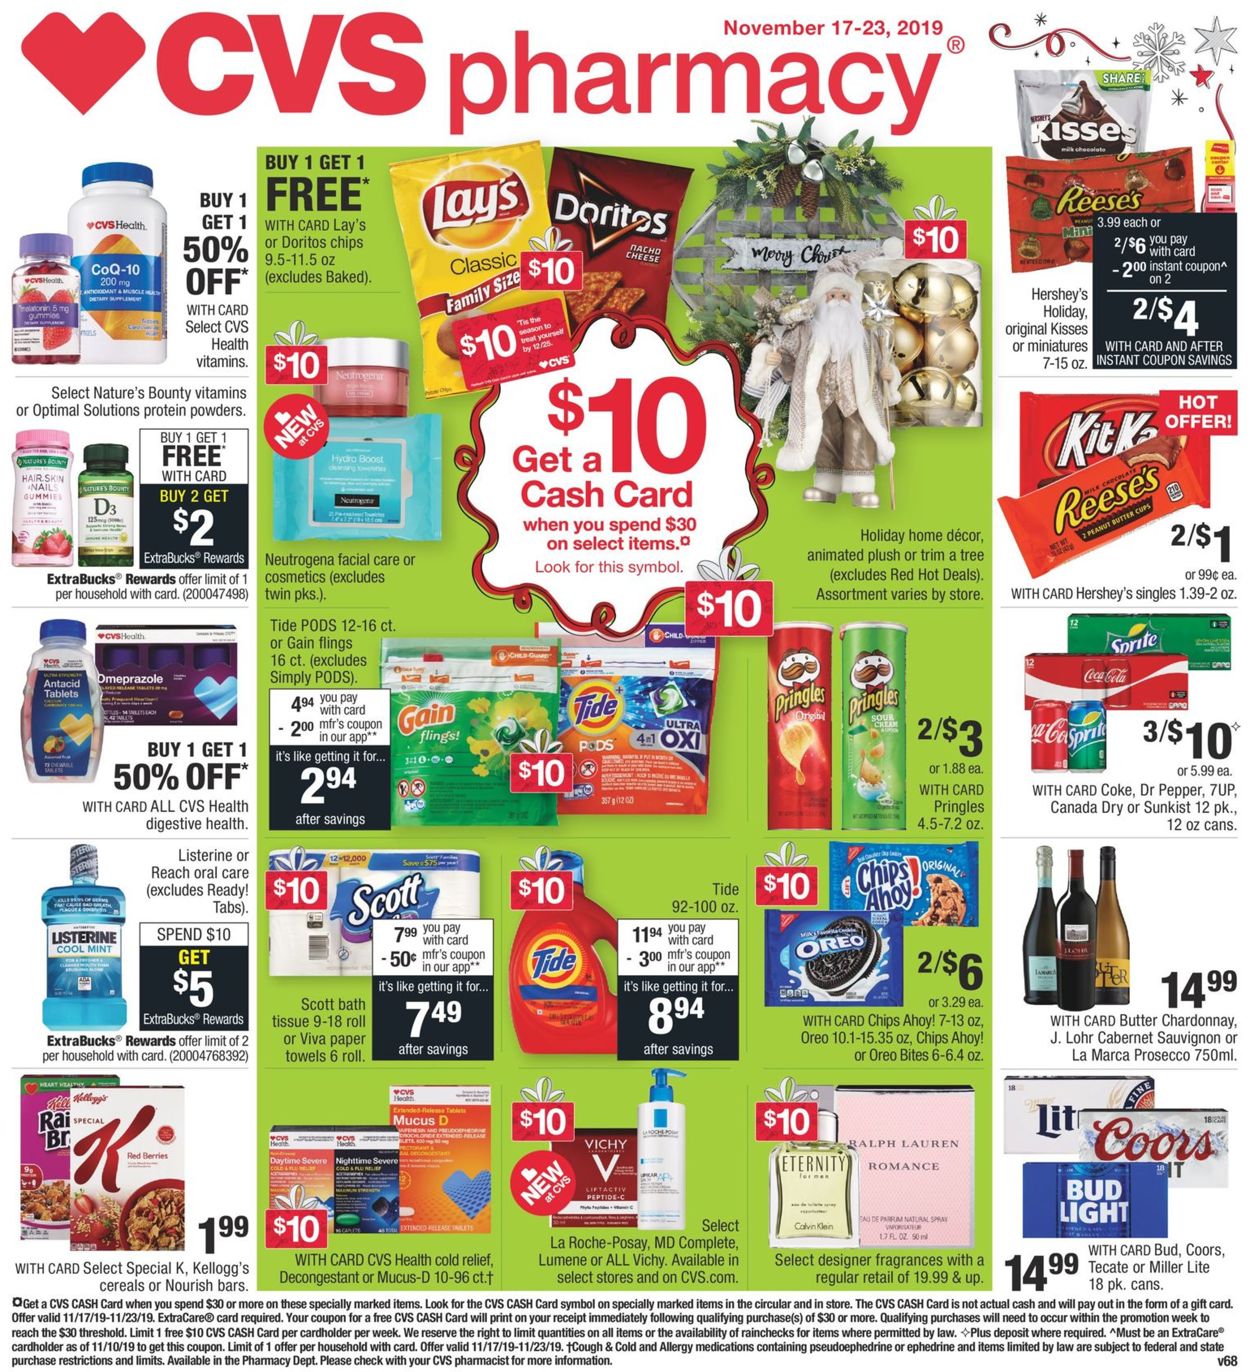 CVS Pharmacy Christmas 2019 Current weekly ad 11/17 11/23/2019